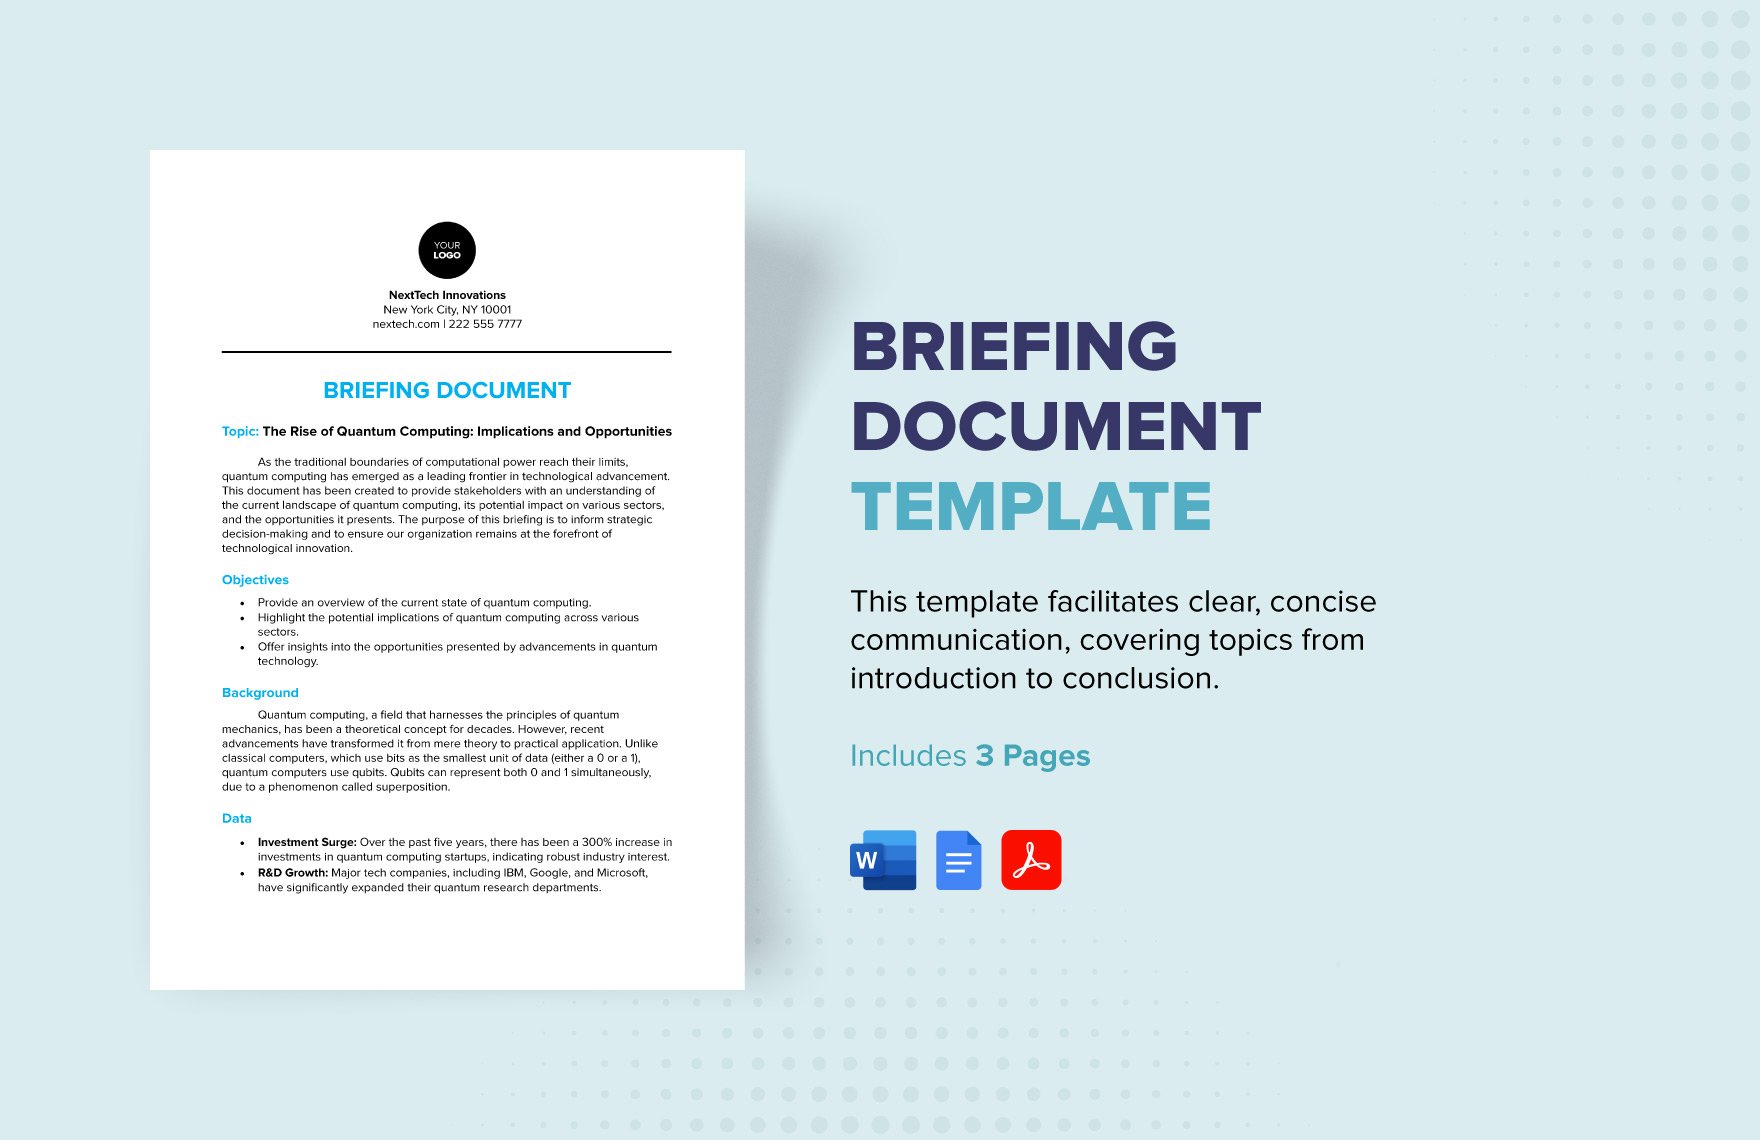 Briefing Document Template